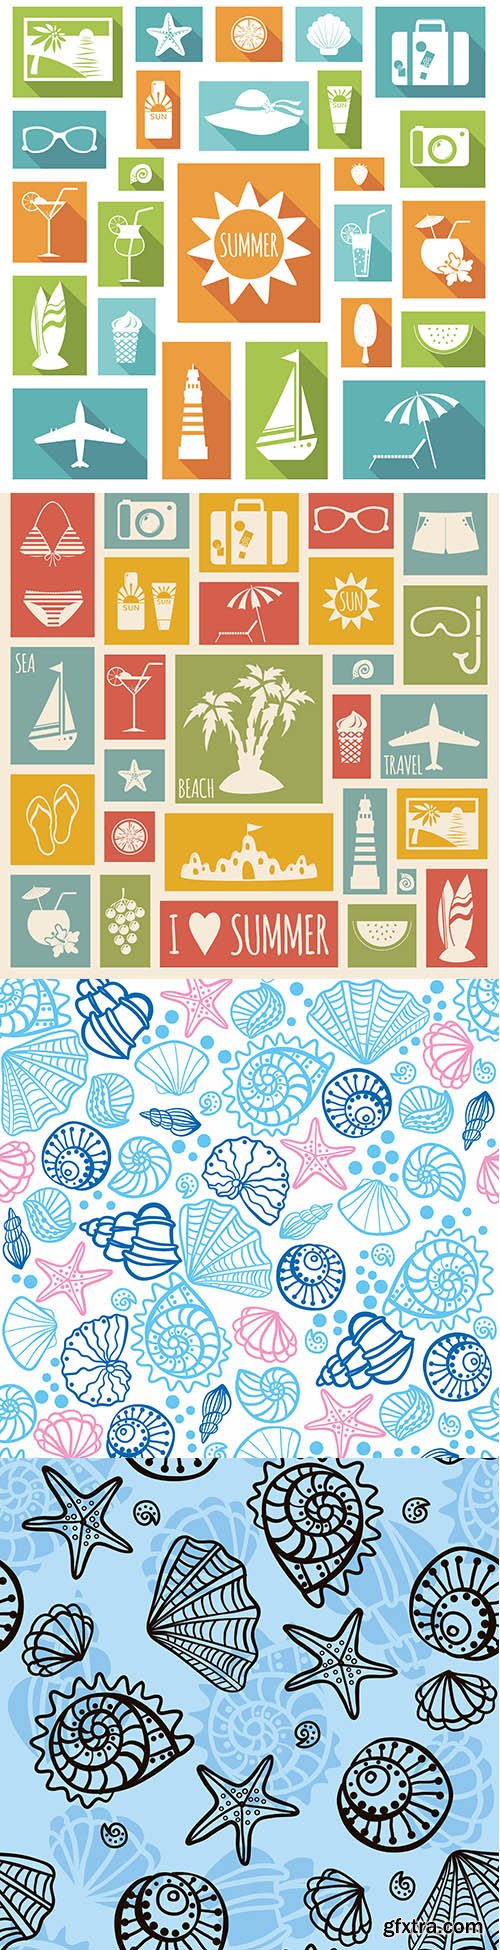 Summer Holiday Flat Elements and Seamless Pattern with Seashells